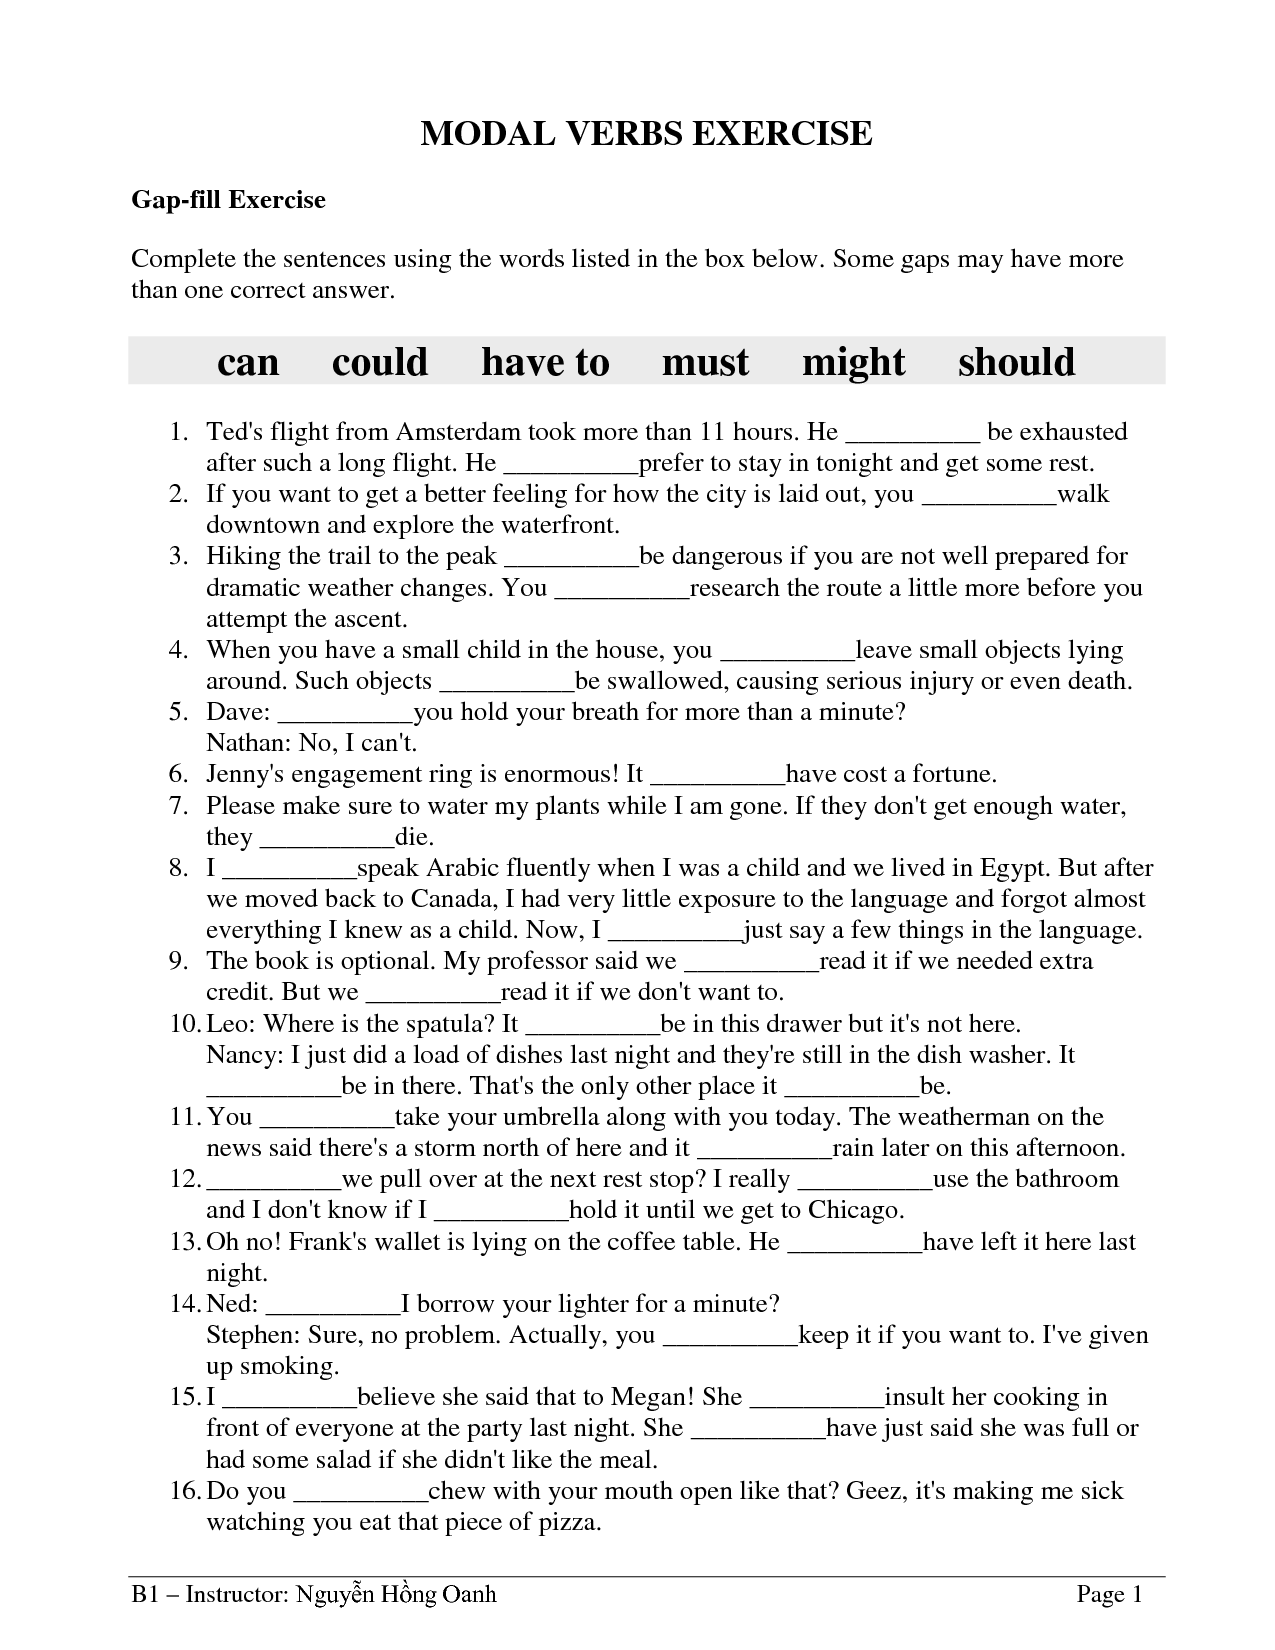 15-best-images-of-modals-can-could-worksheets-and-can-could-worksheet